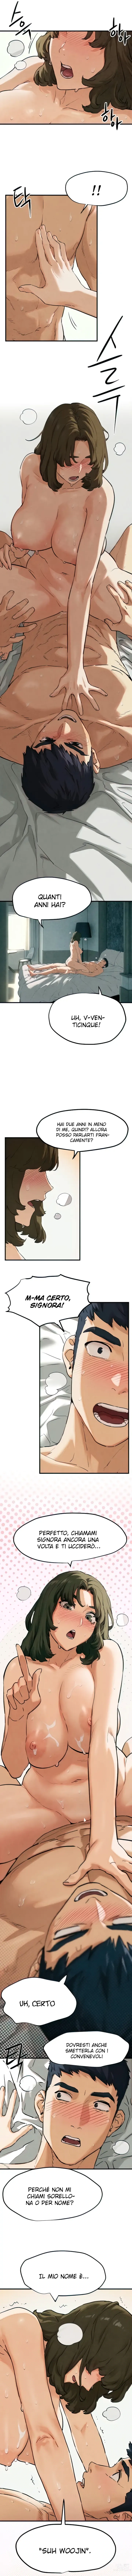 Page 9 of manga Moby Dick Capitolo 03